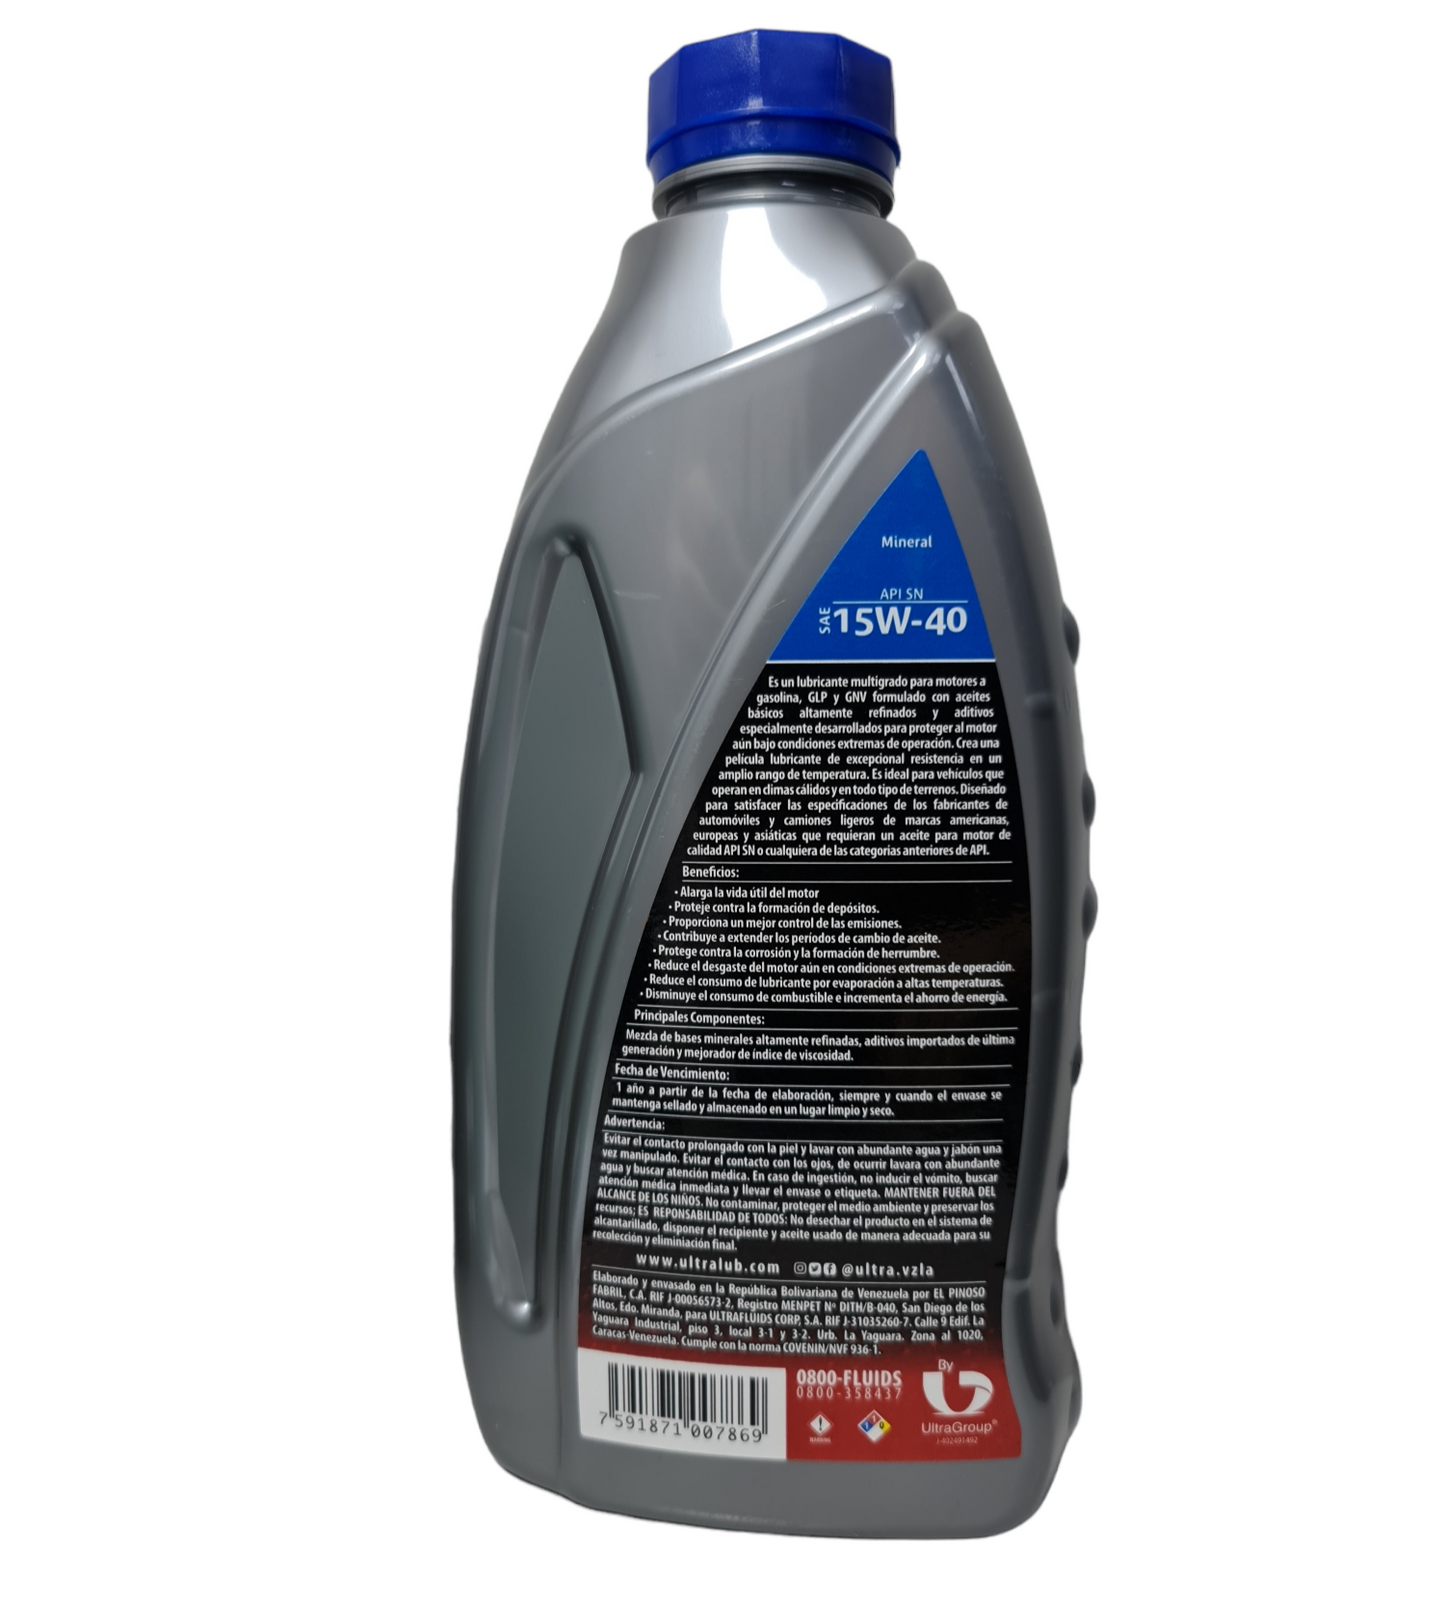 Aceite Ultralub Mineral 15w-40